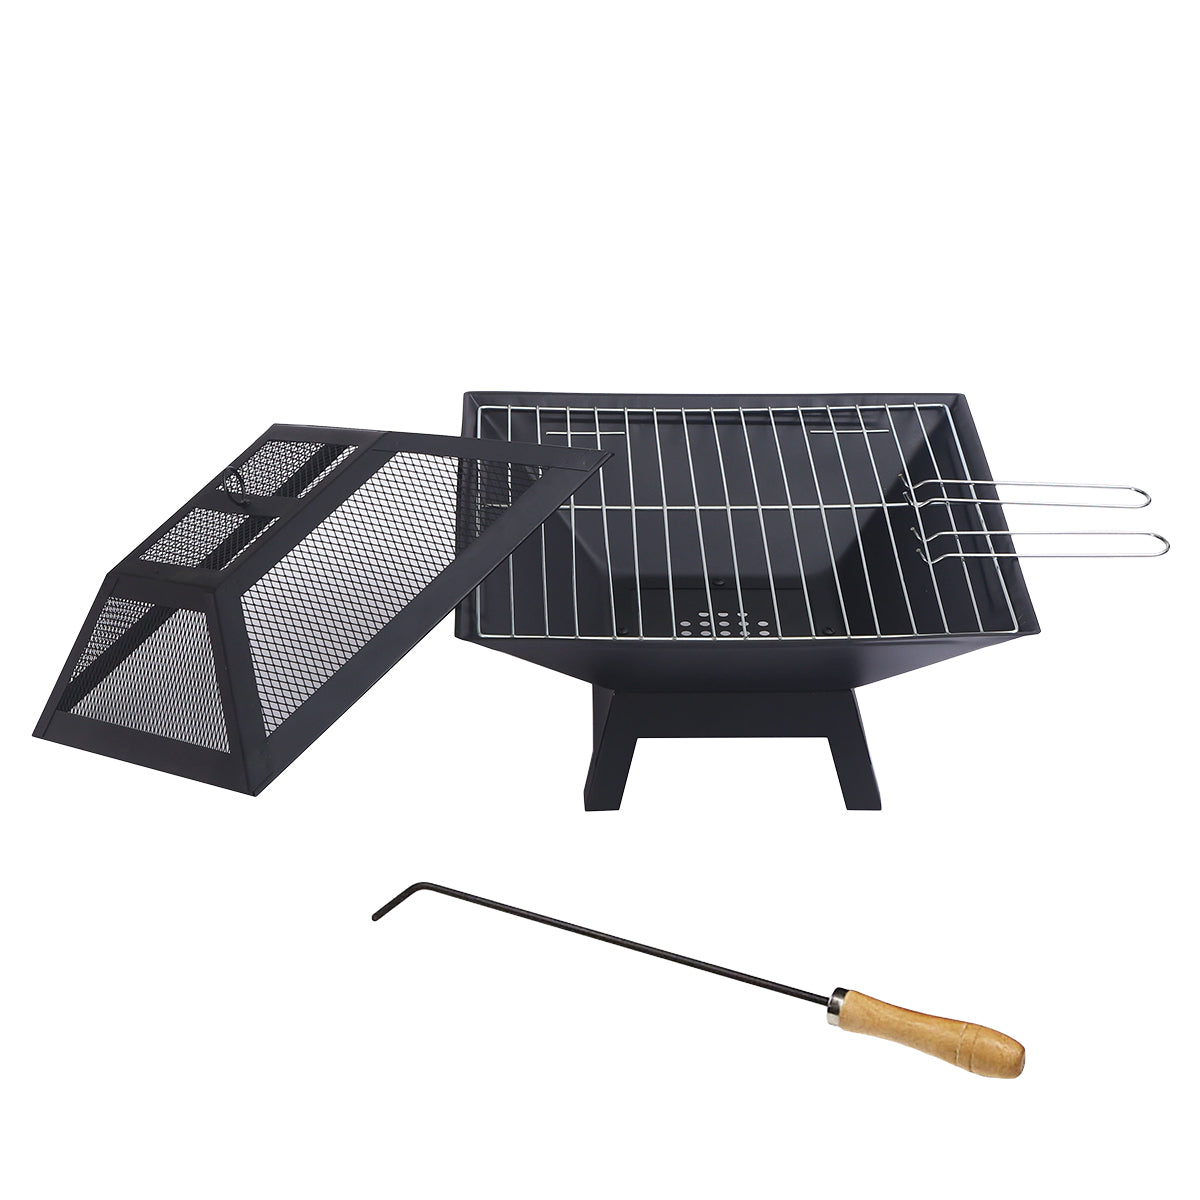 Wallaroo Portable Outdoor Fire Pit for BBQ, Grilling, Cooking, Camping - SILBERSHELL